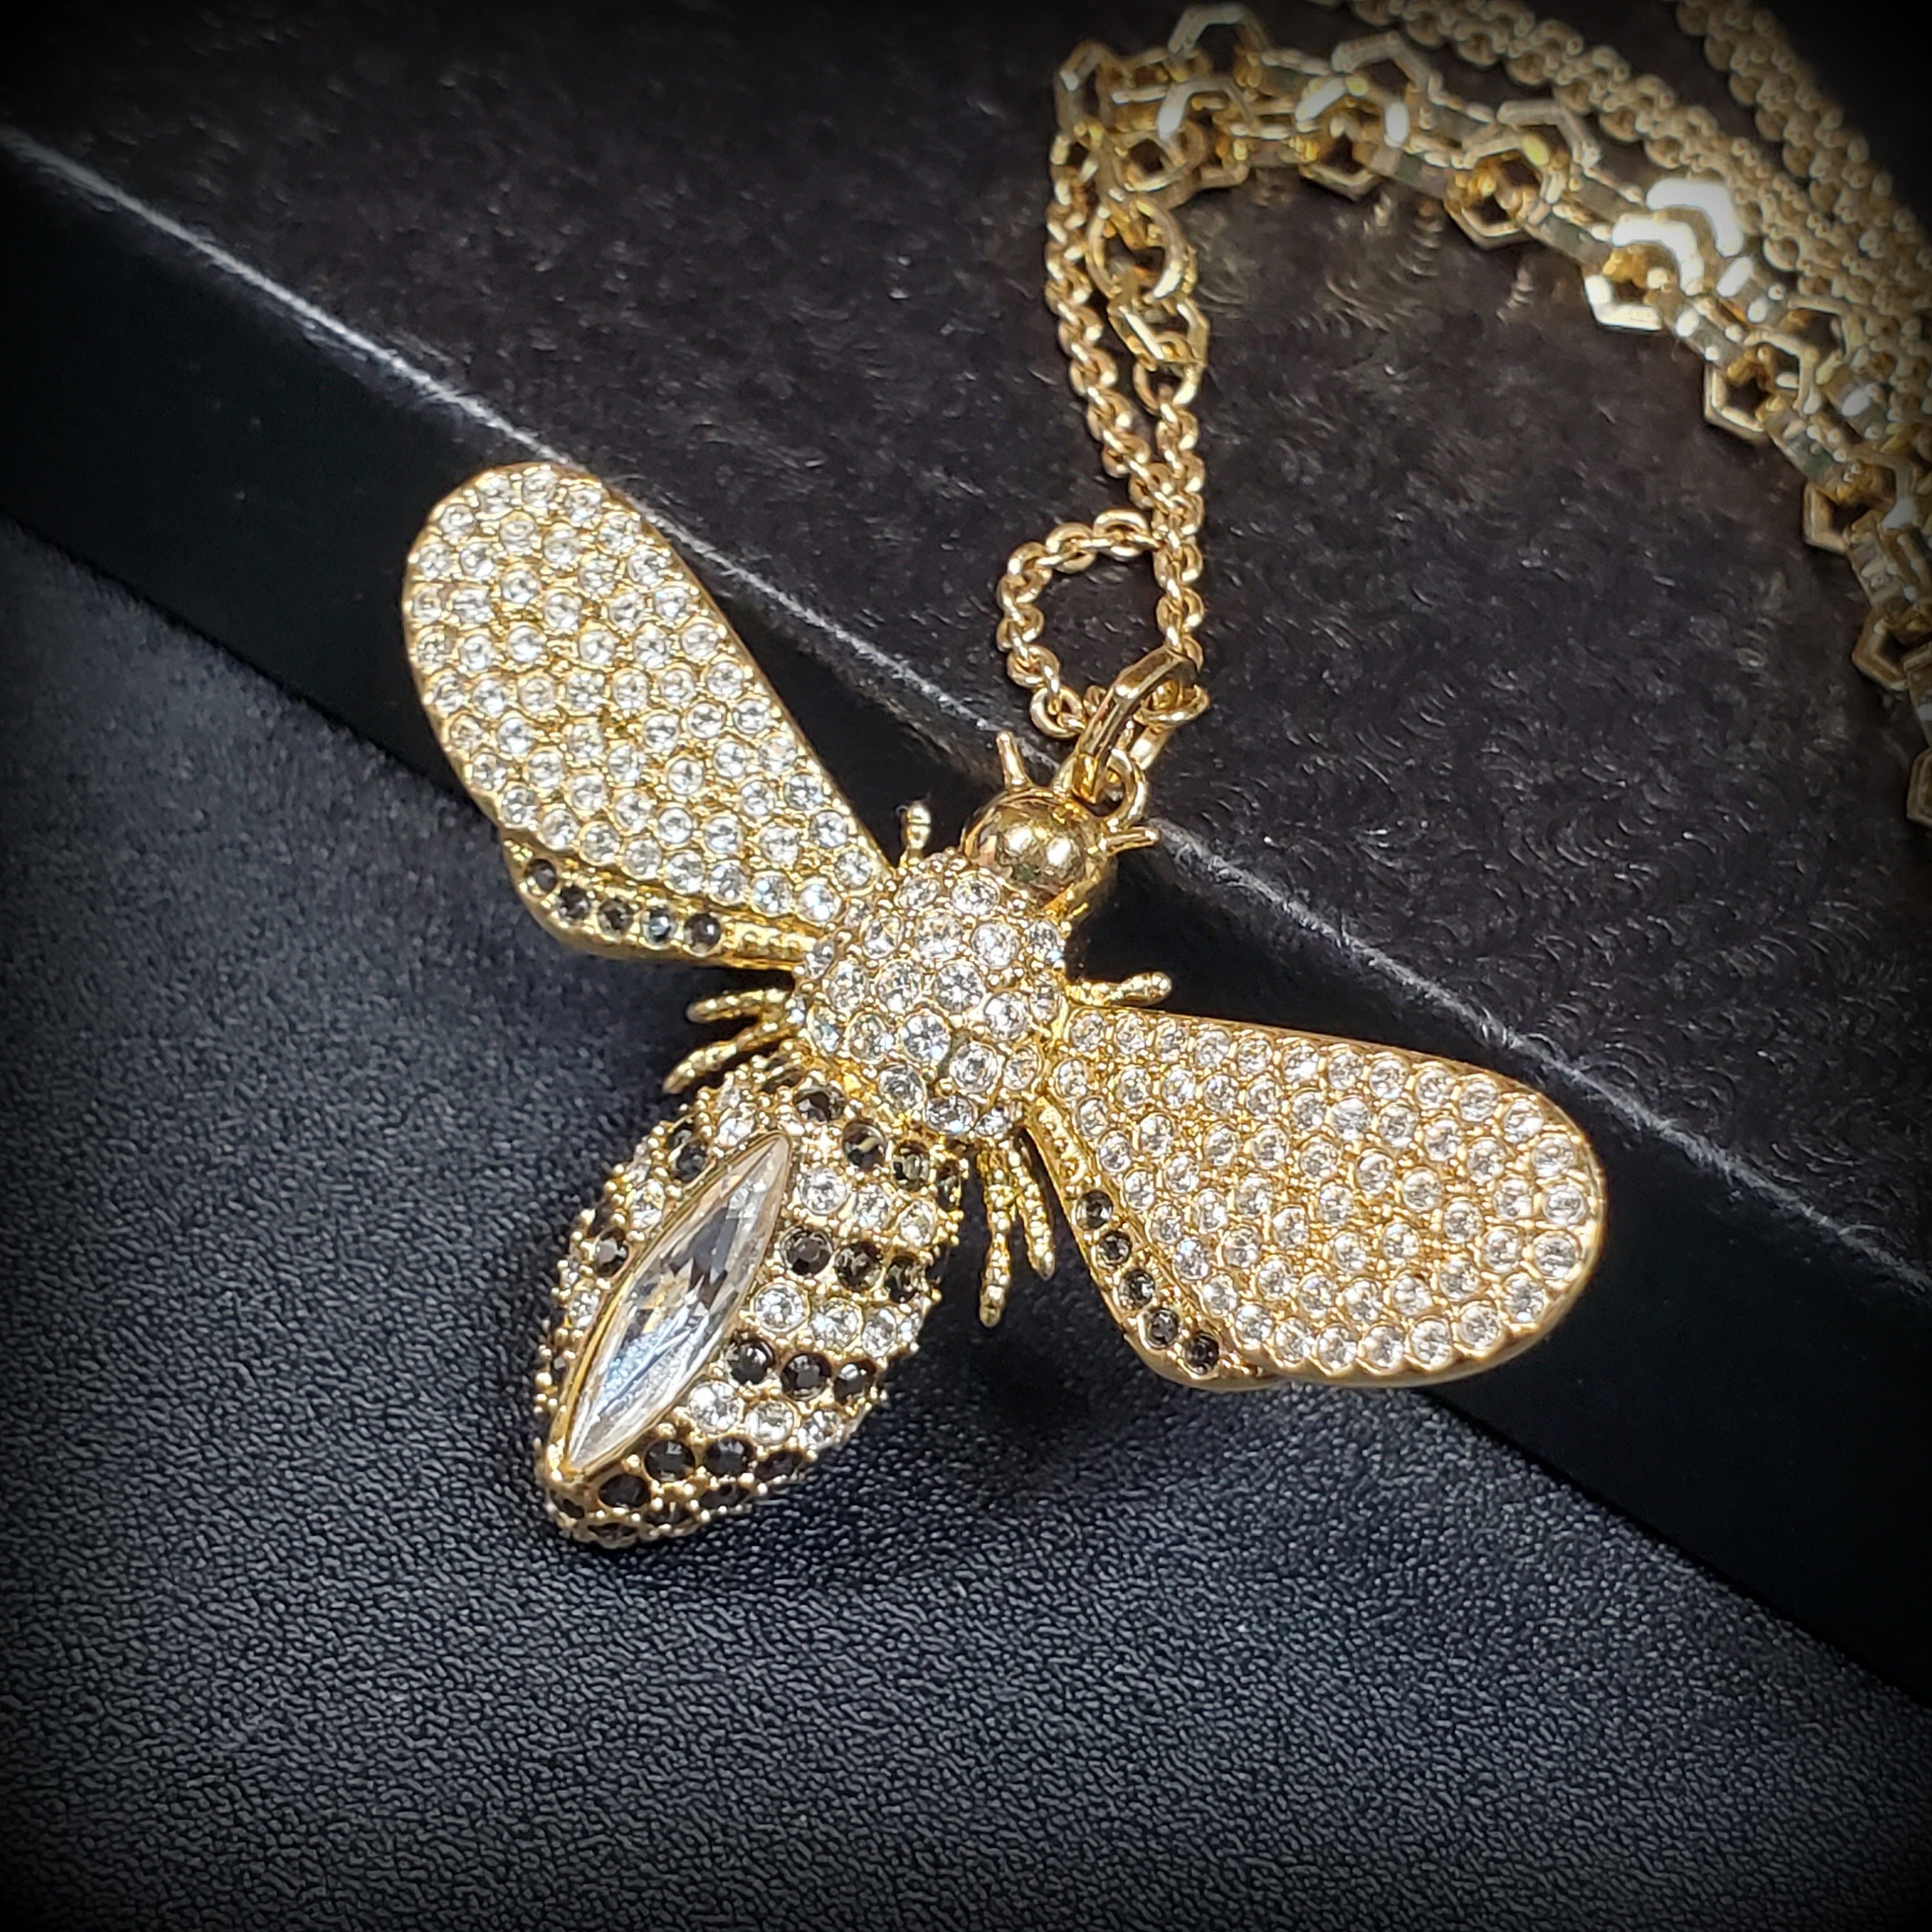 Sterling Silver Bee Pendant Necklace with Crystals from Swarovski -  Walmart.com